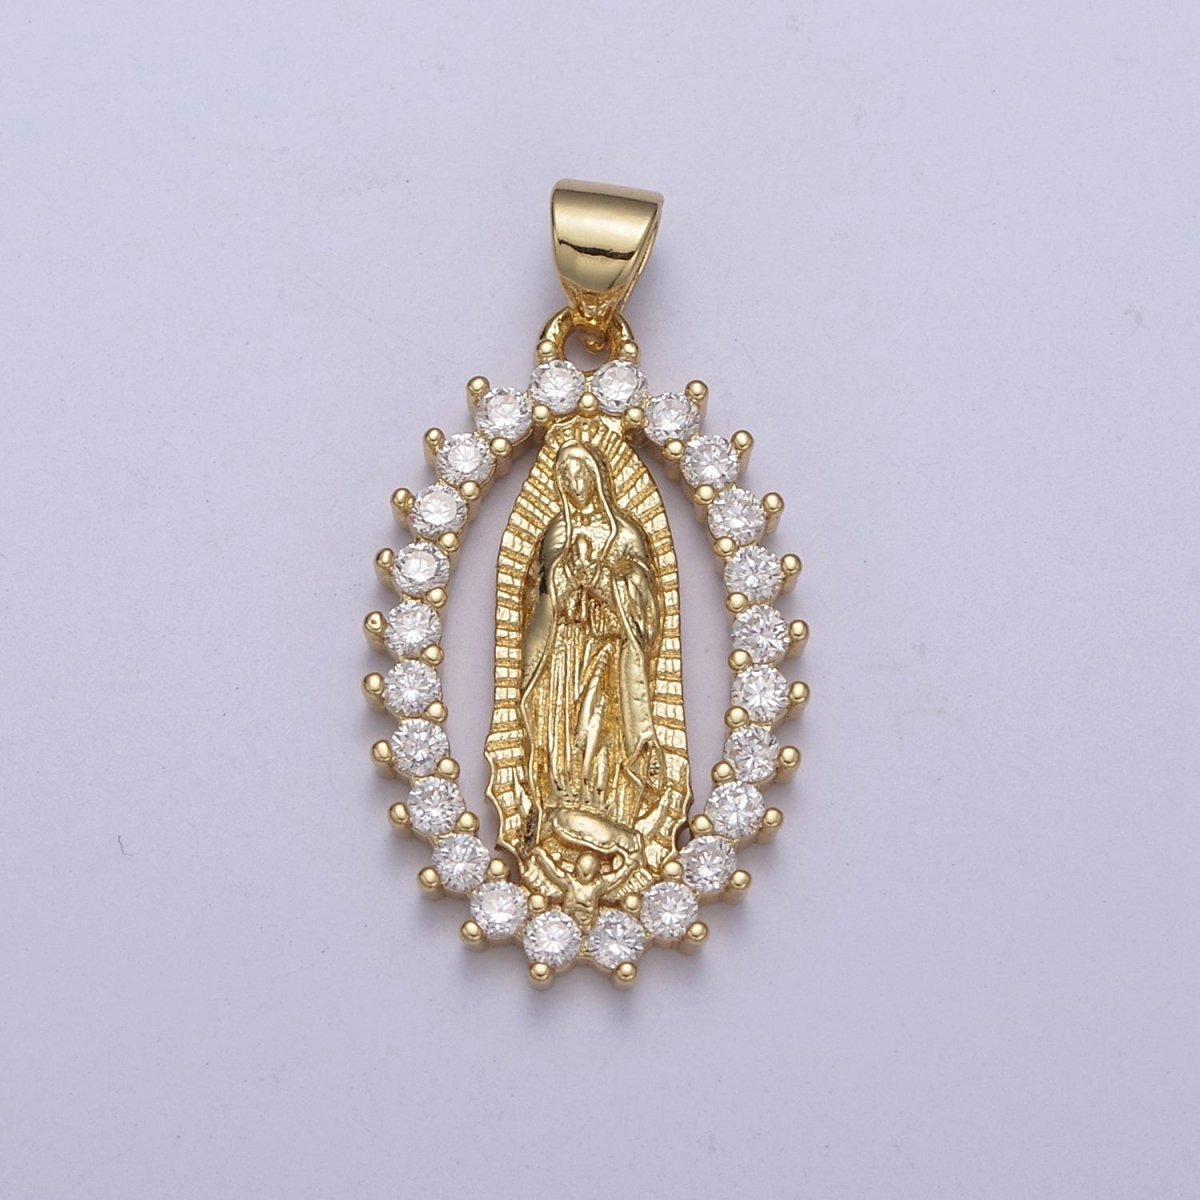 14k Gold filled Virgin Mary Pendant CZ Lady Guadalupe Charm necklace, religious Catholic Jewelry charm H-235 - DLUXCA